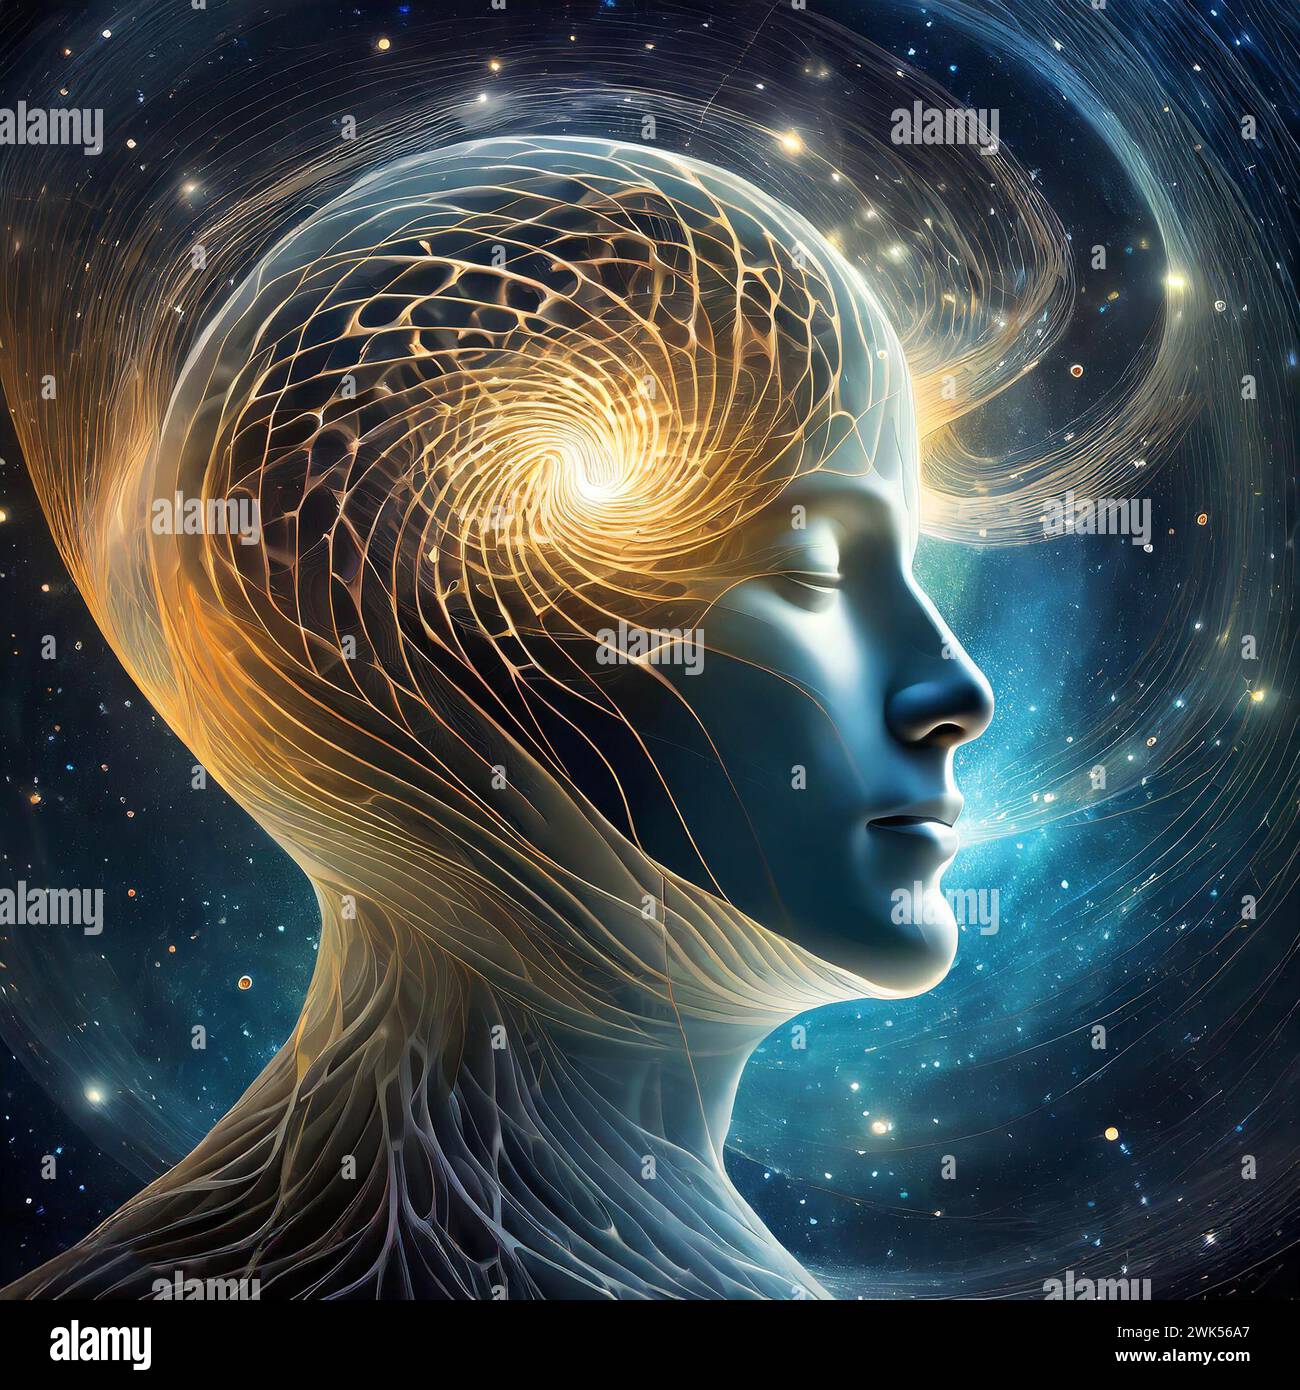 Graphic Ai image illustrating the potential connection between the consciousness mind and the universe Stock Photo